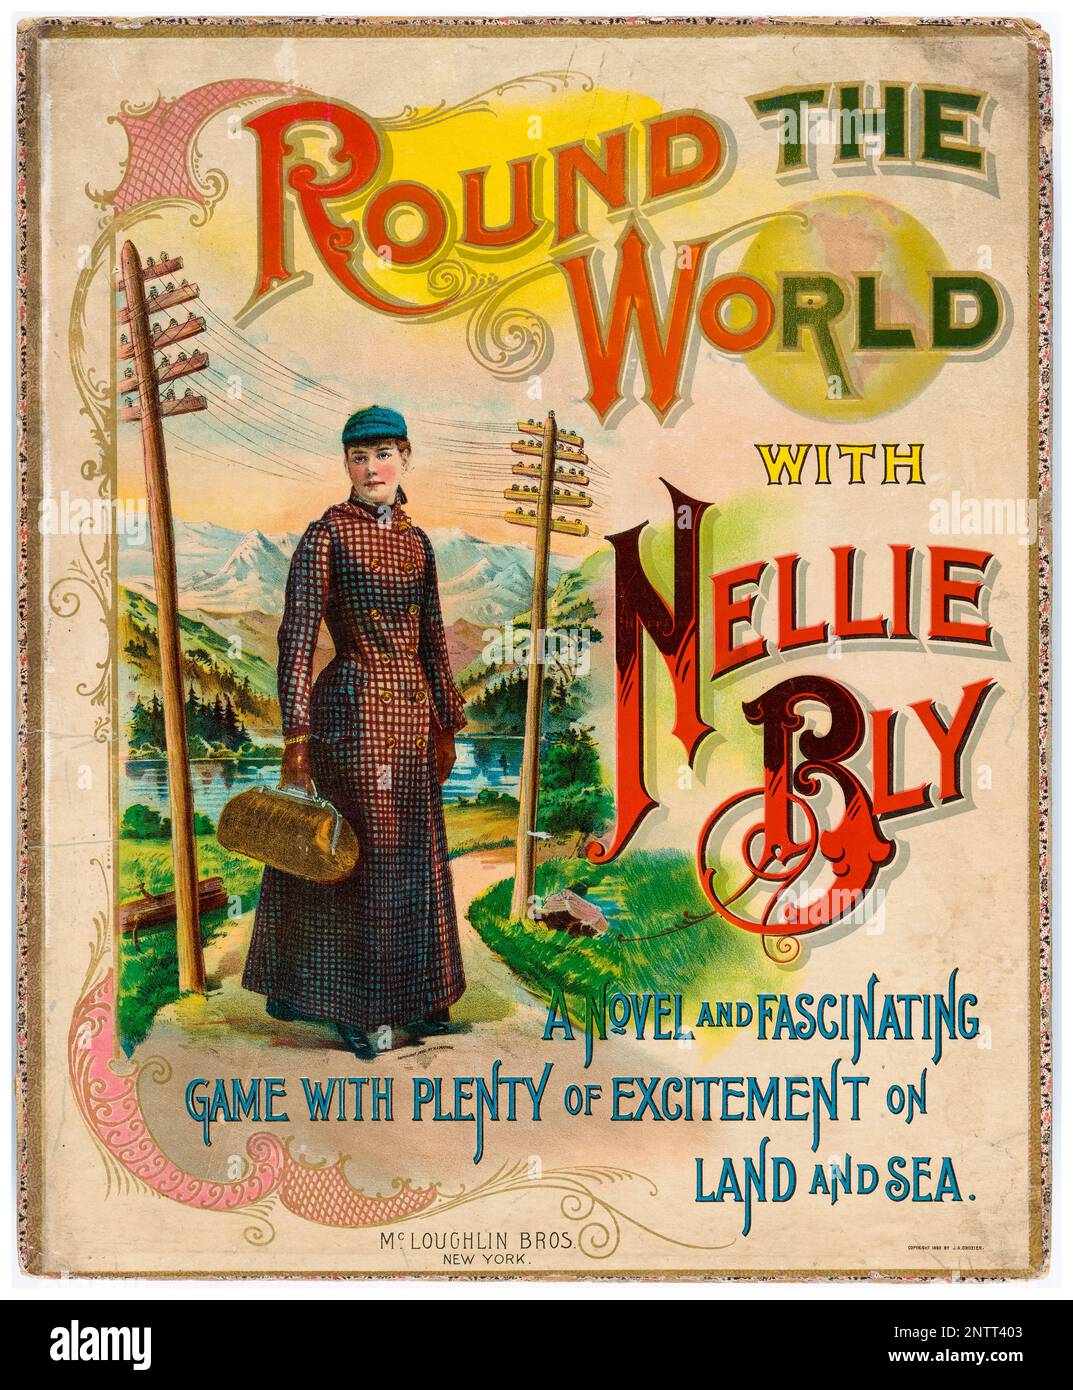 Round The World with Nellie Bly, Board Game cover, painting by JA Grozier, after HA Mayers, circa 1890 Stock Photo